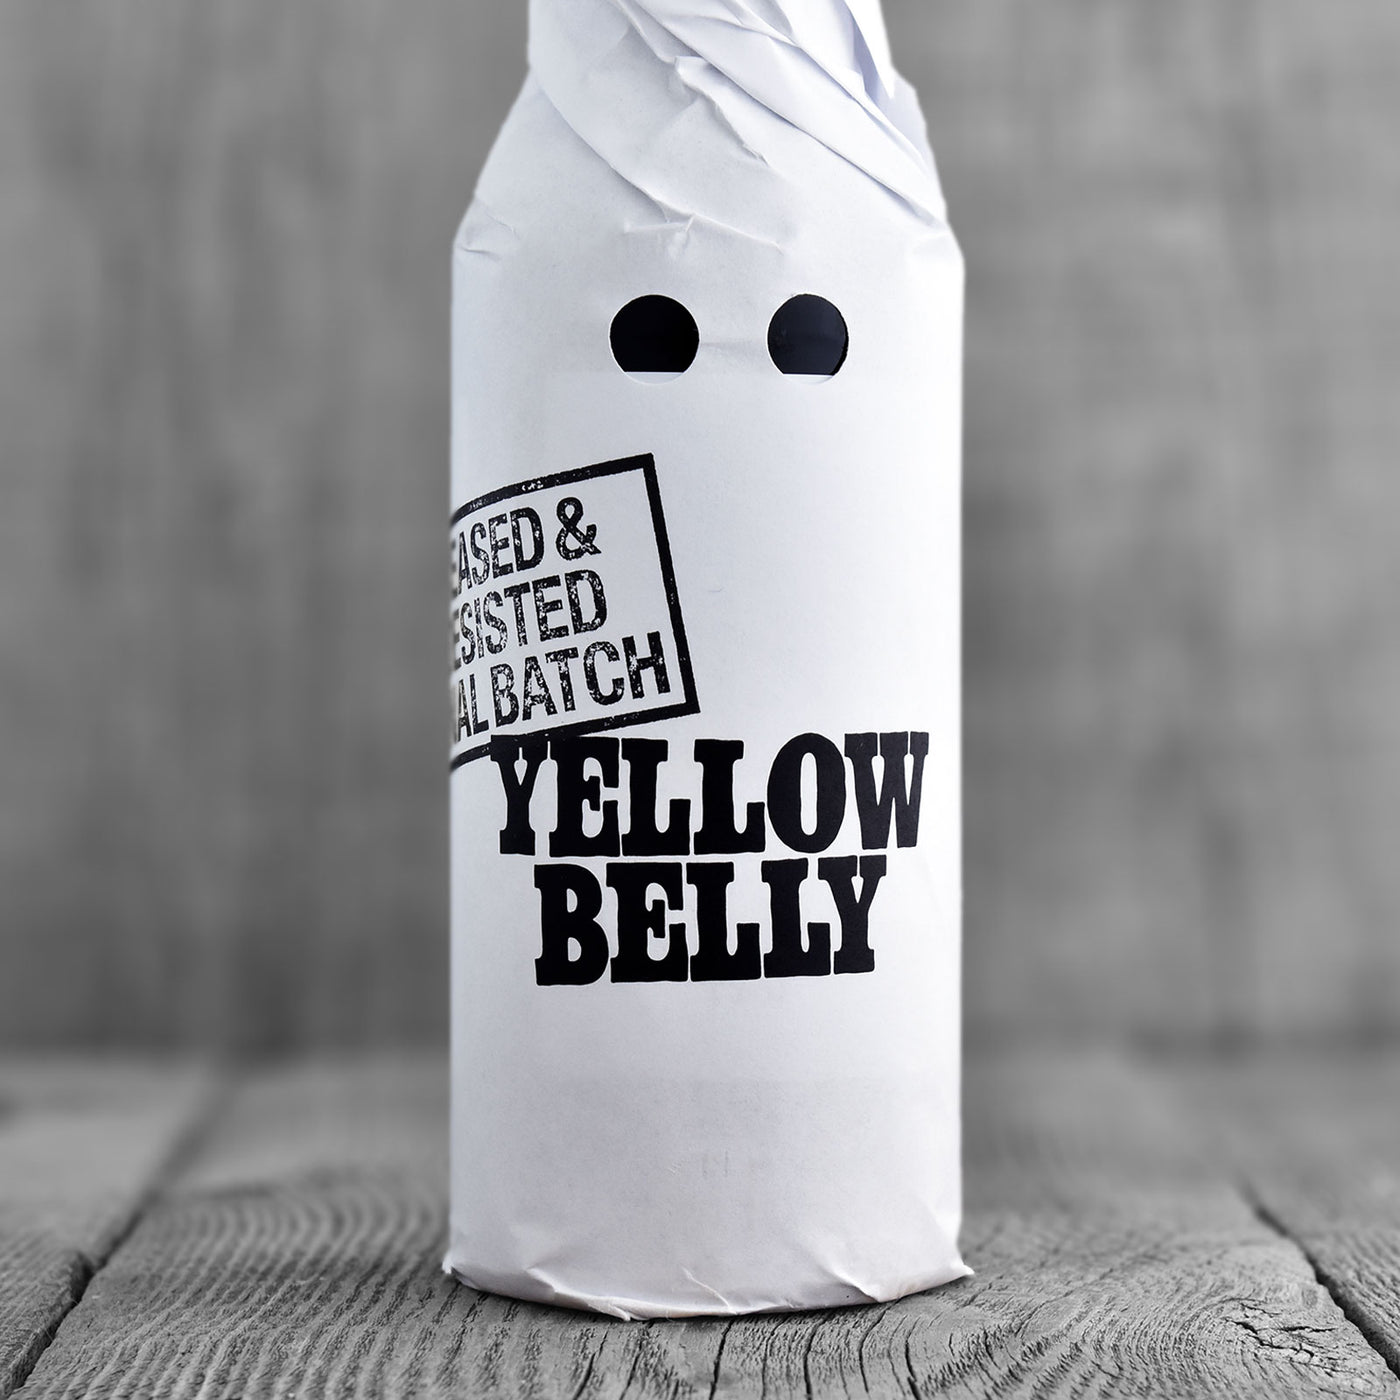 Omnipollo / Buxton - Yellow Belly Ceased & Desisted Final Batch - Limit 2